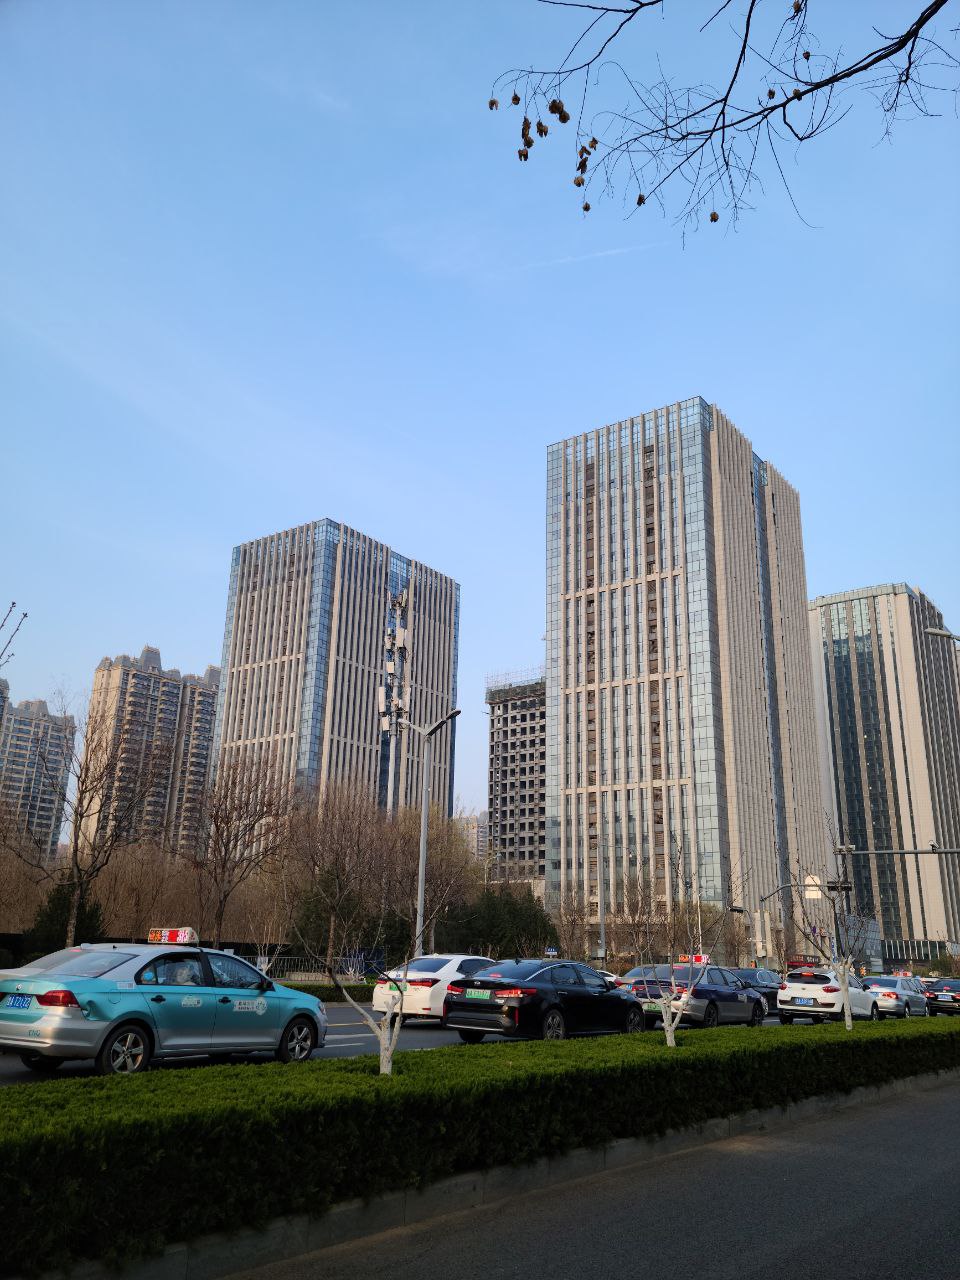 cars parked in a parking lot in front of a group of tall buildings